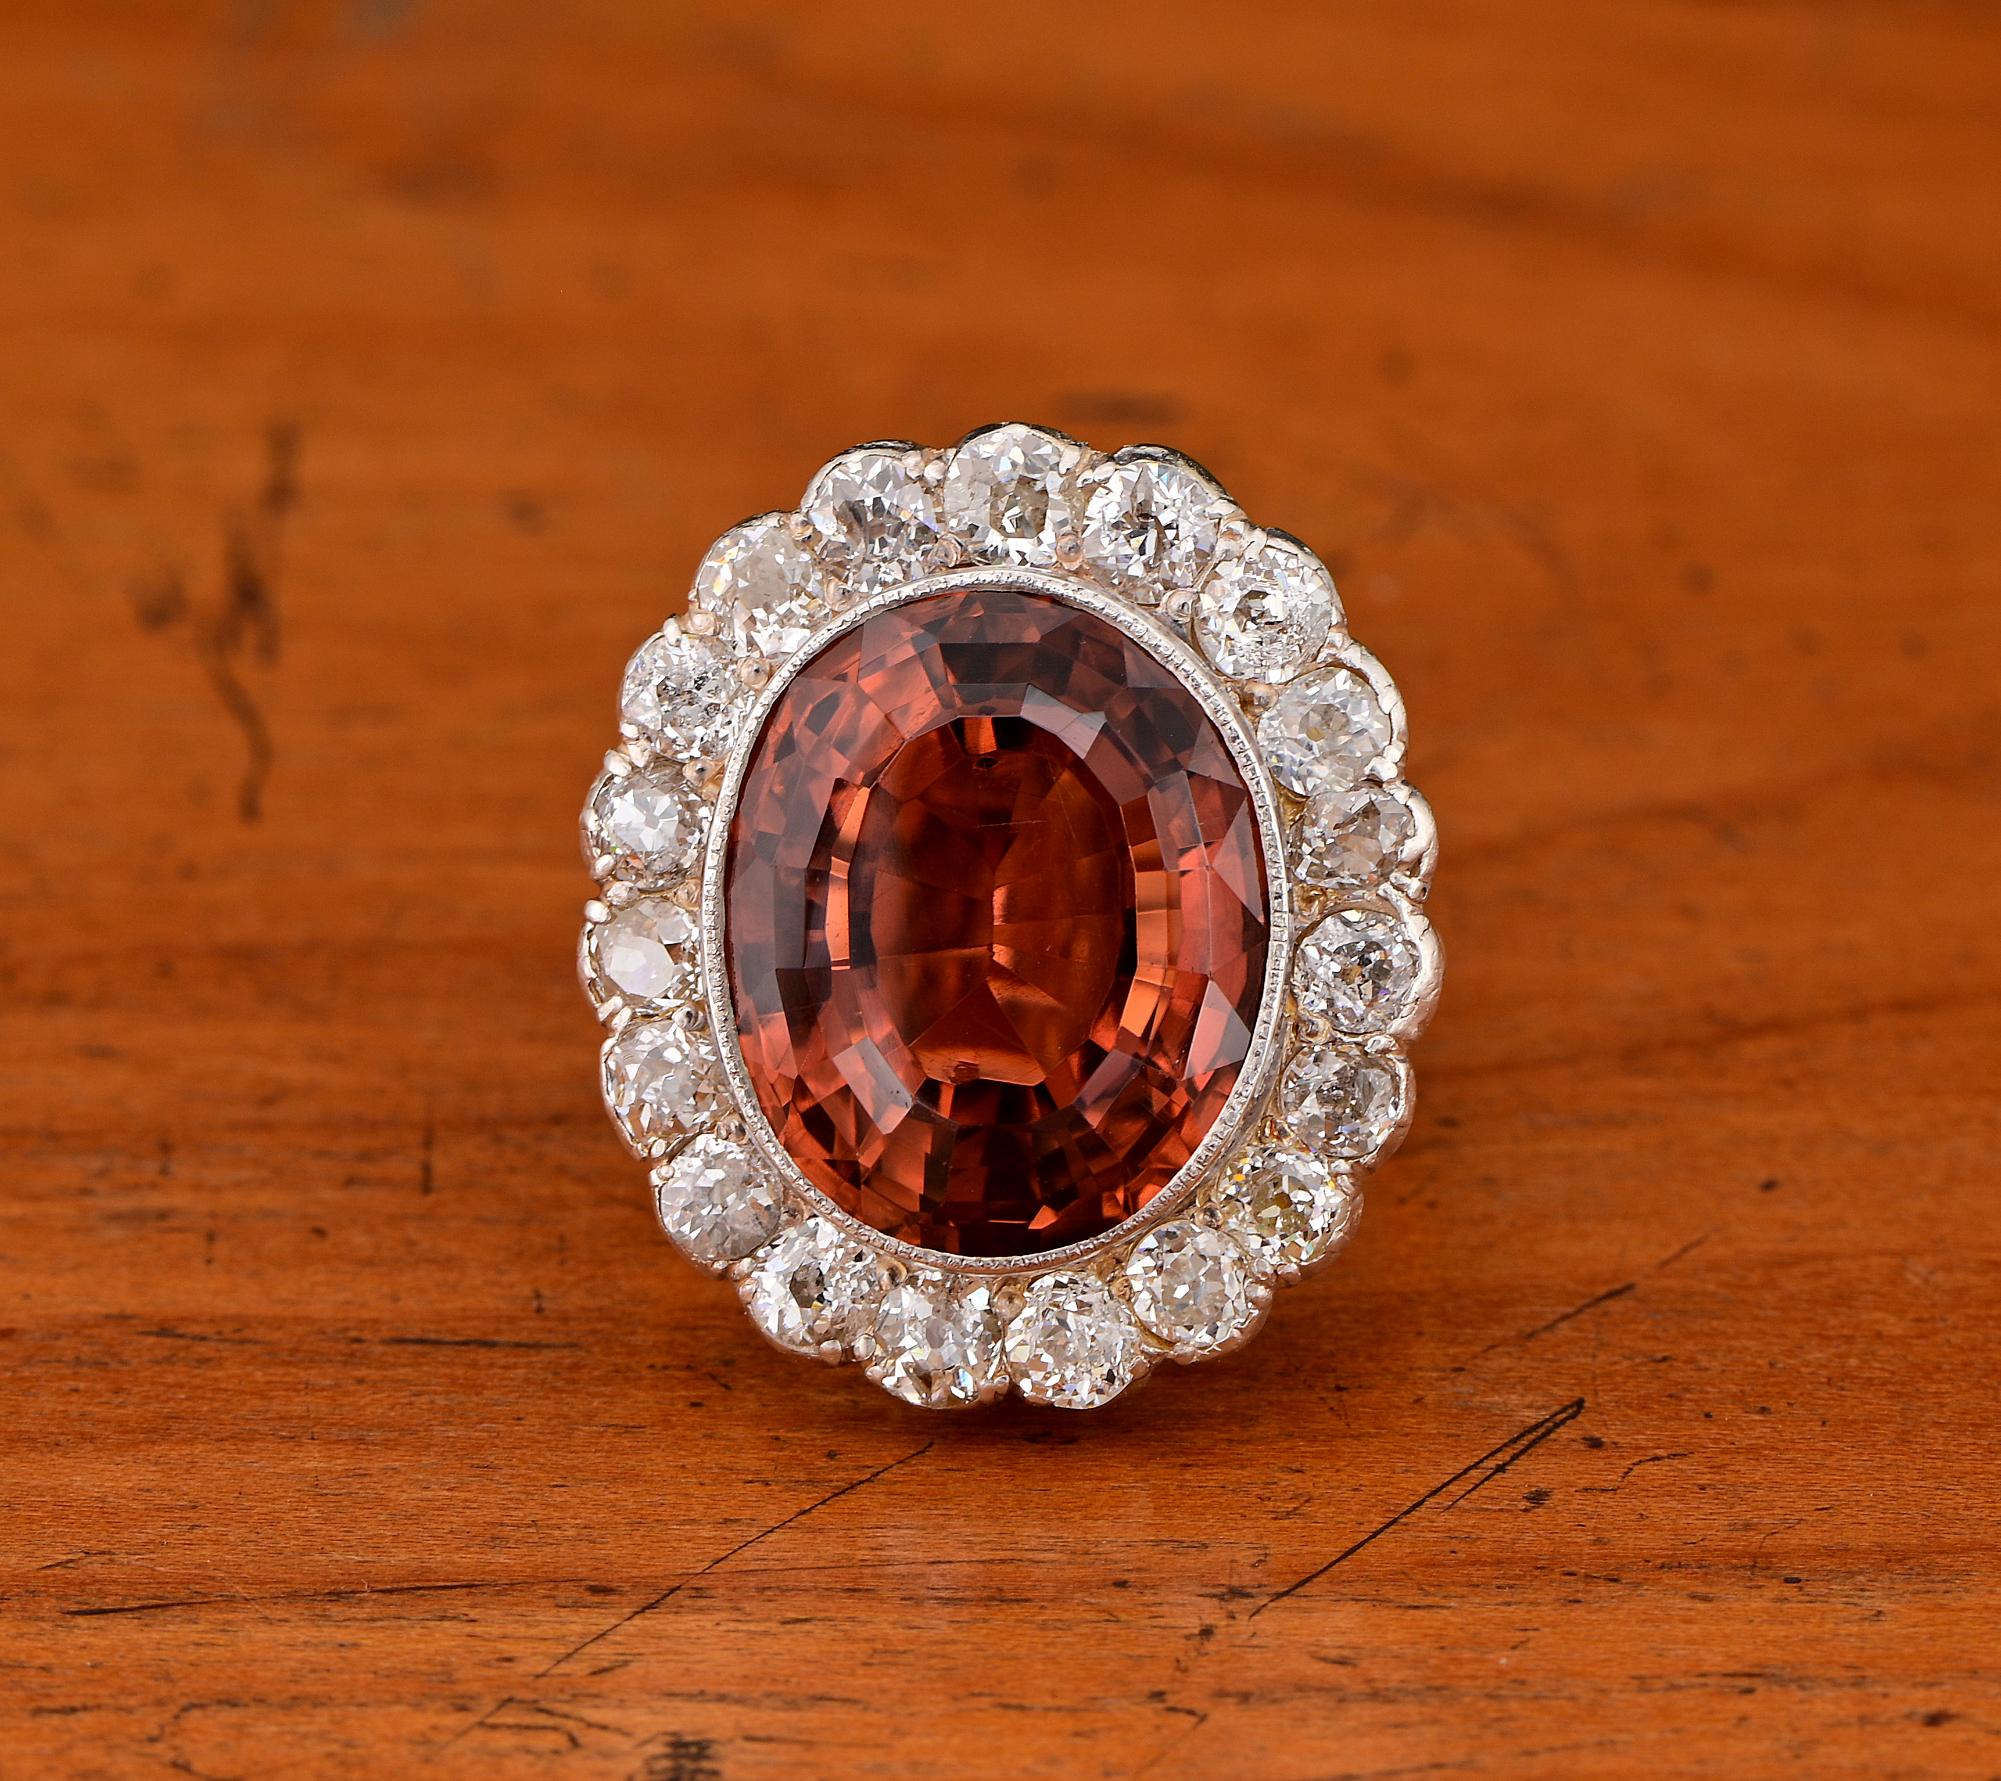 Surprisingly Beautiful
This outstanding antique ring is Victorian  transitional Edwardian period 1890/1900 ca
Large statement ring designed upon the main stone as classy cluster to surpass time as a stand out for ever
Hand crafted of solid 18 kt